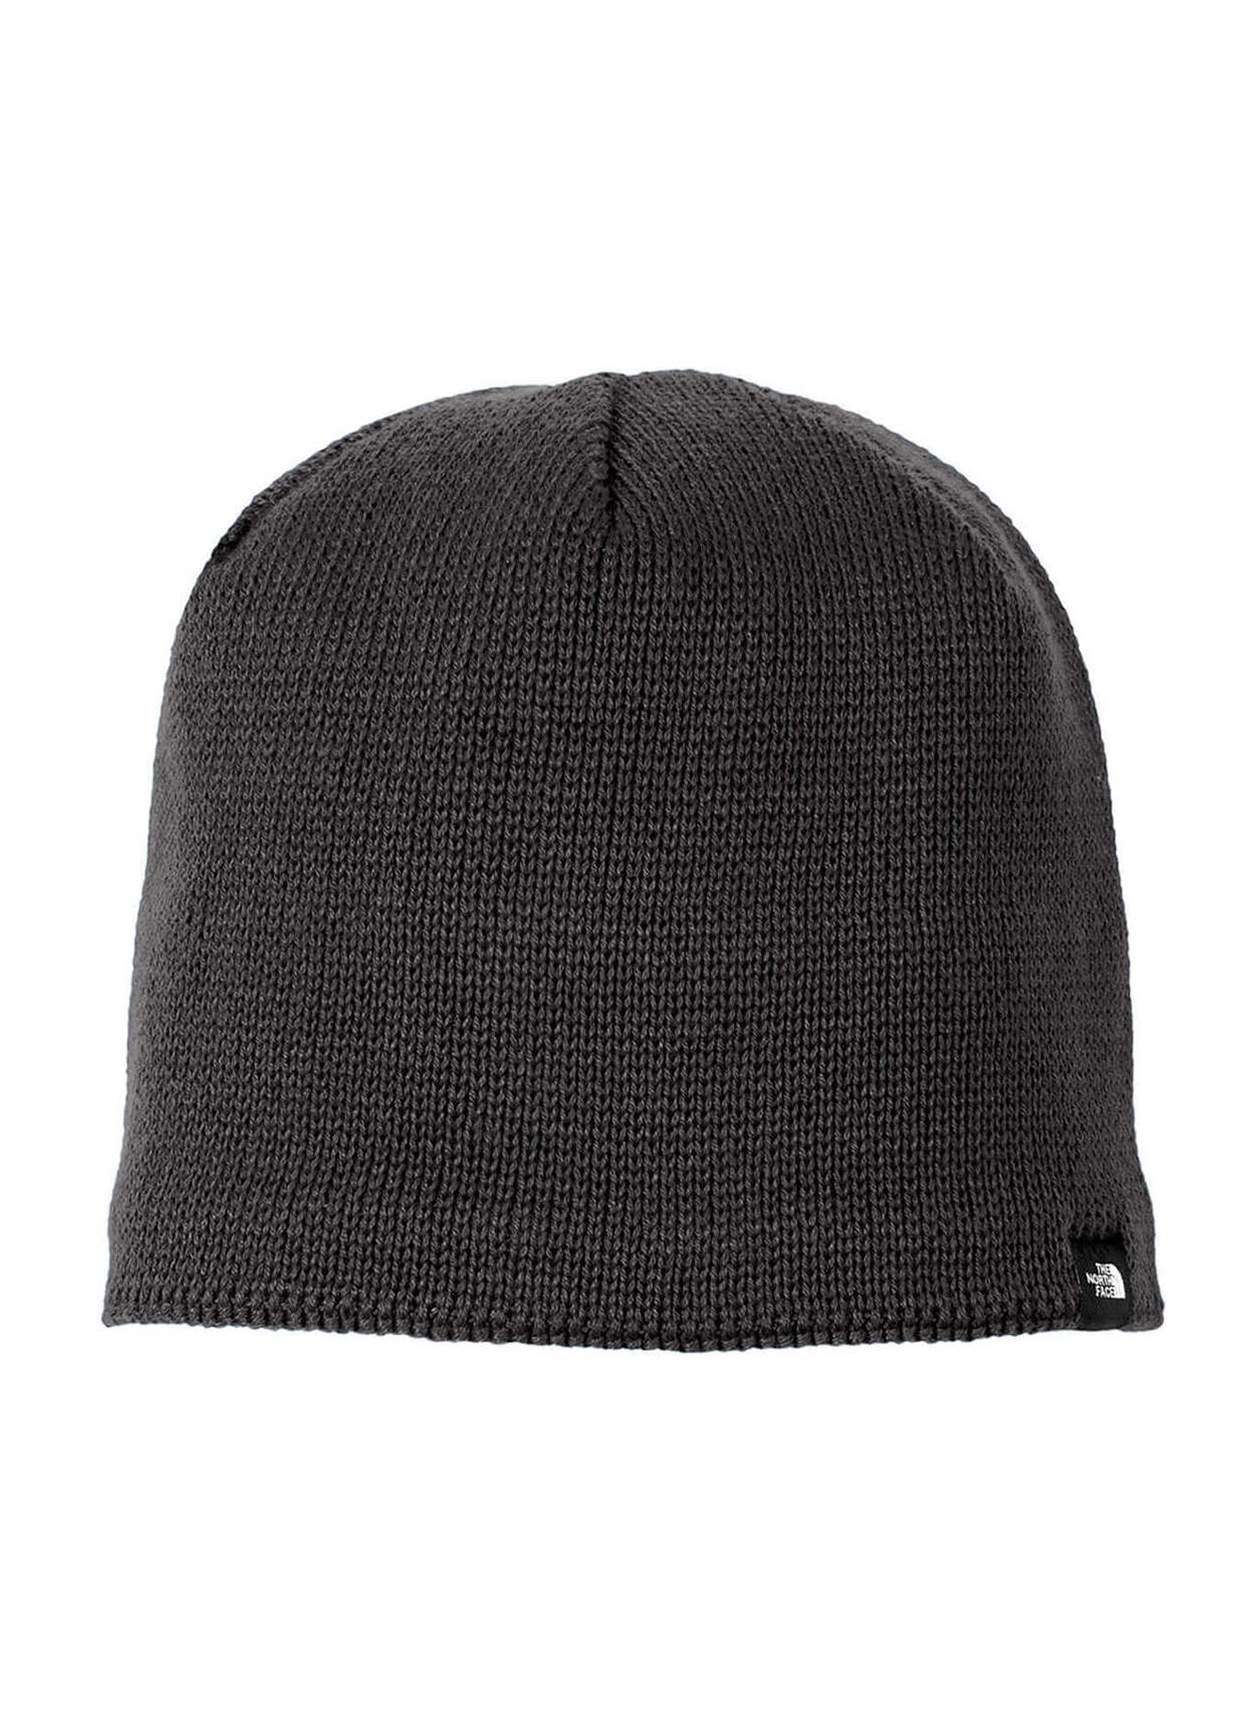 TNF Dark Grey Heather The North Face Mountain Beanie | The North Face